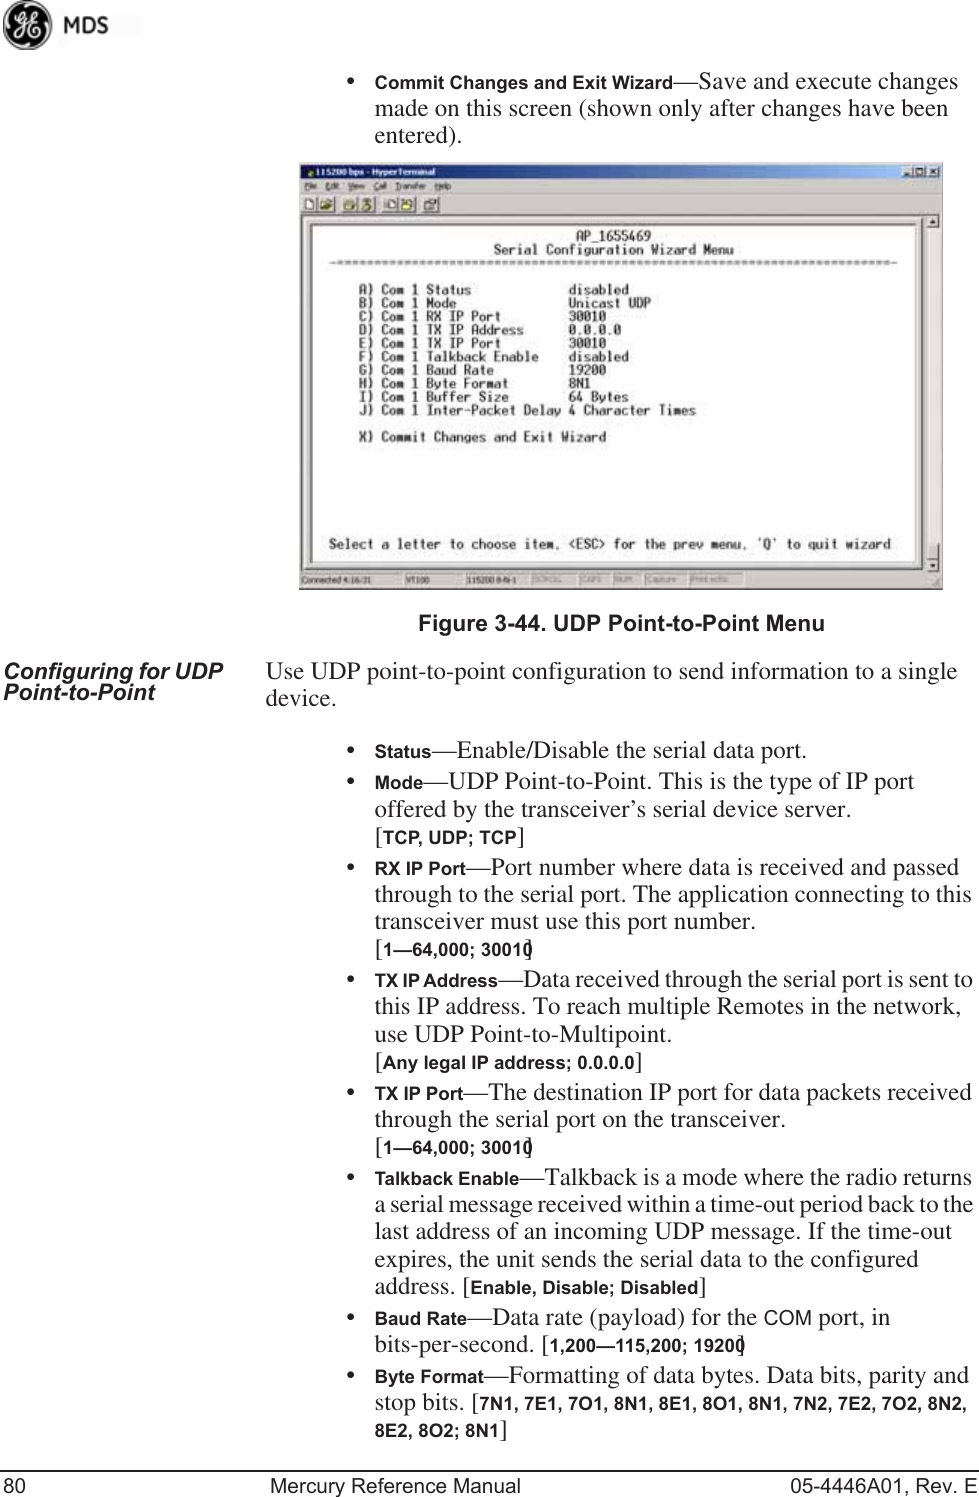 80 Mercury Reference Manual 05-4446A01, Rev. E•Commit Changes and Exit Wizard—Save and execute changes made on this screen (shown only after changes have been entered). Invisible place holderFigure 3-44. UDP Point-to-Point MenuConfiguring for UDP Point-to-Point Use UDP point-to-point configuration to send information to a single device.•Status—Enable/Disable the serial data port. •Mode—UDP Point-to-Point. This is the type of IP port offered by the transceiver’s serial device server. [TCP, UDP; TCP]•RX IP Port—Port number where data is received and passed through to the serial port. The application connecting to this transceiver must use this port number.[1—64,000; 30010]•TX IP Address—Data received through the serial port is sent to this IP address. To reach multiple Remotes in the network, use UDP Point-to-Multipoint. [Any legal IP address; 0.0.0.0]•TX IP Port—The destination IP port for data packets received through the serial port on the transceiver. [1—64,000; 30010]•Talkback Enable—Talkback is a mode where the radio returns a serial message received within a time-out period back to the last address of an incoming UDP message. If the time-out expires, the unit sends the serial data to the configured address. [Enable, Disable; Disabled]•Baud Rate—Data rate (payload) for the COM port, in bits-per-second. [1,200—115,200; 19200] •Byte Format—Formatting of data bytes. Data bits, parity and stop bits. [7N1, 7E1, 7O1, 8N1, 8E1, 8O1, 8N1, 7N2, 7E2, 7O2, 8N2, 8E2, 8O2; 8N1]